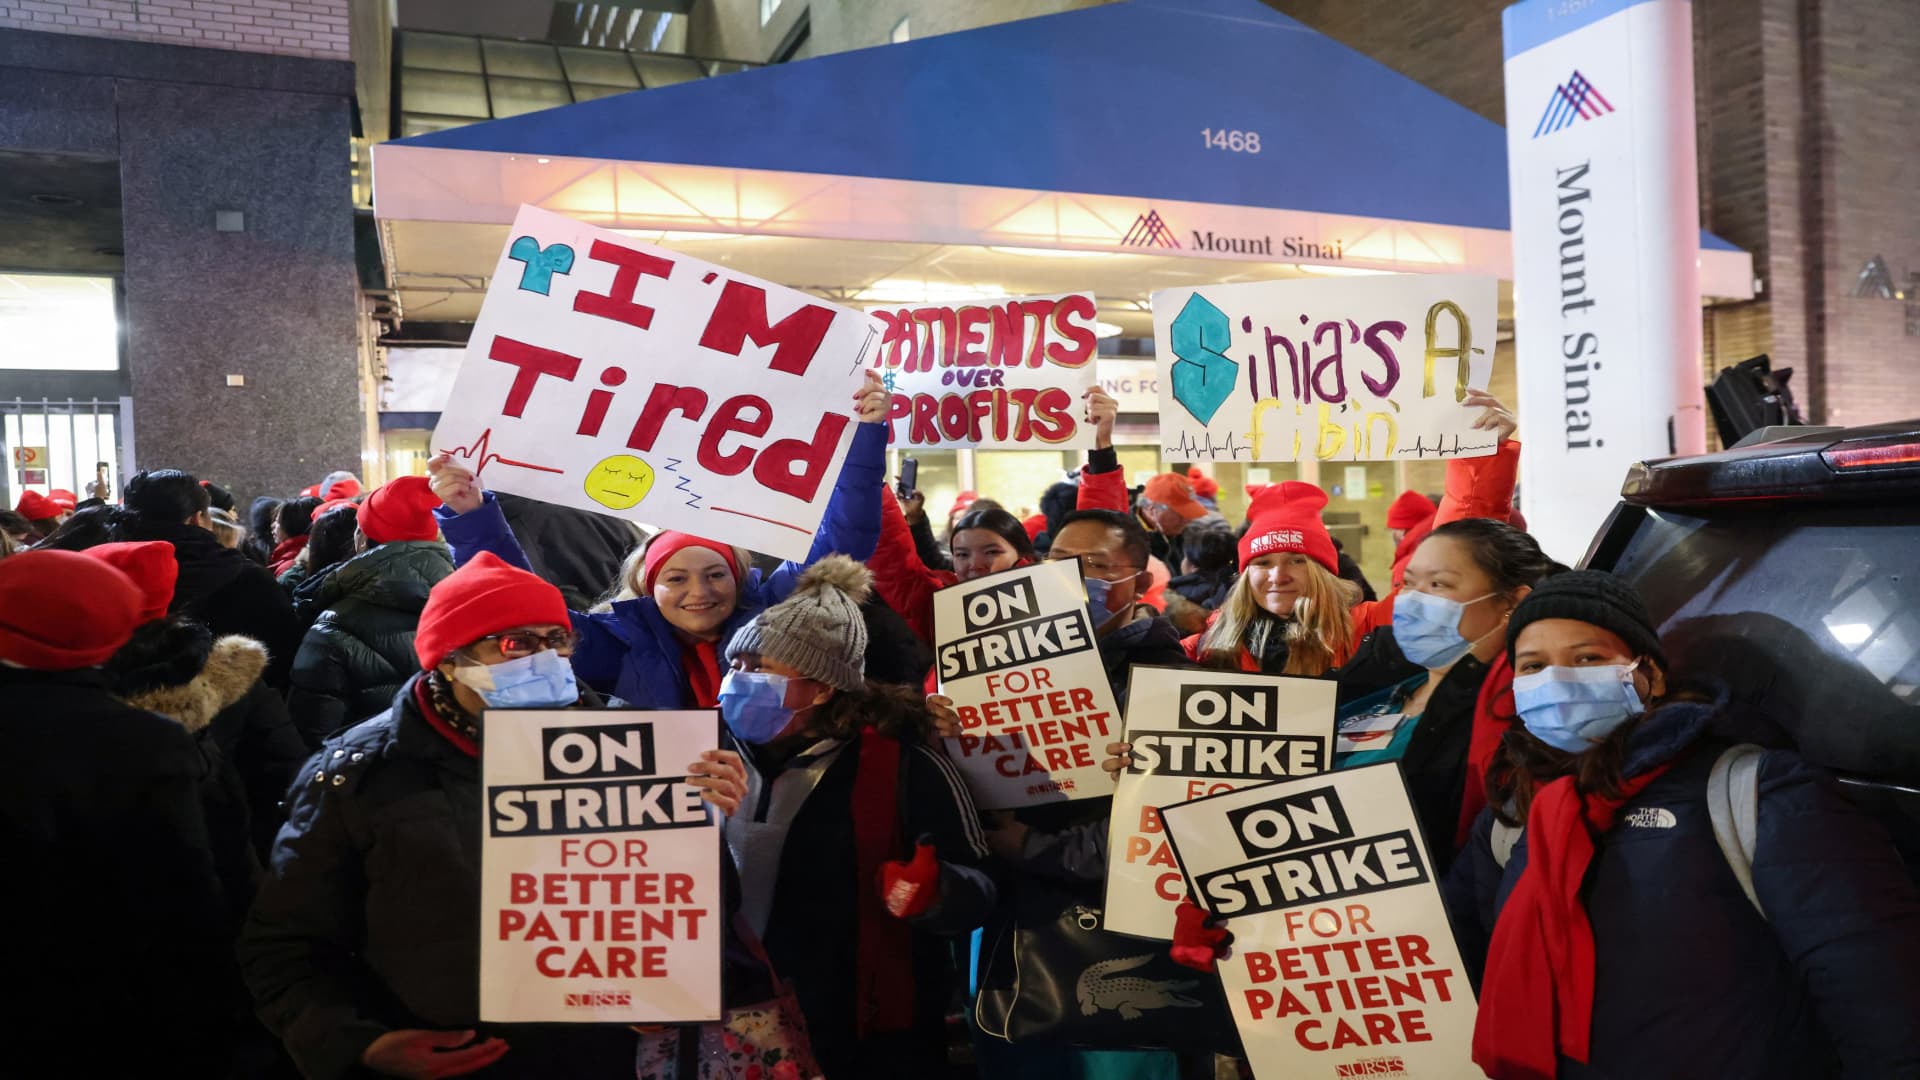 Even as New York nurses return to work, more strikes could follow